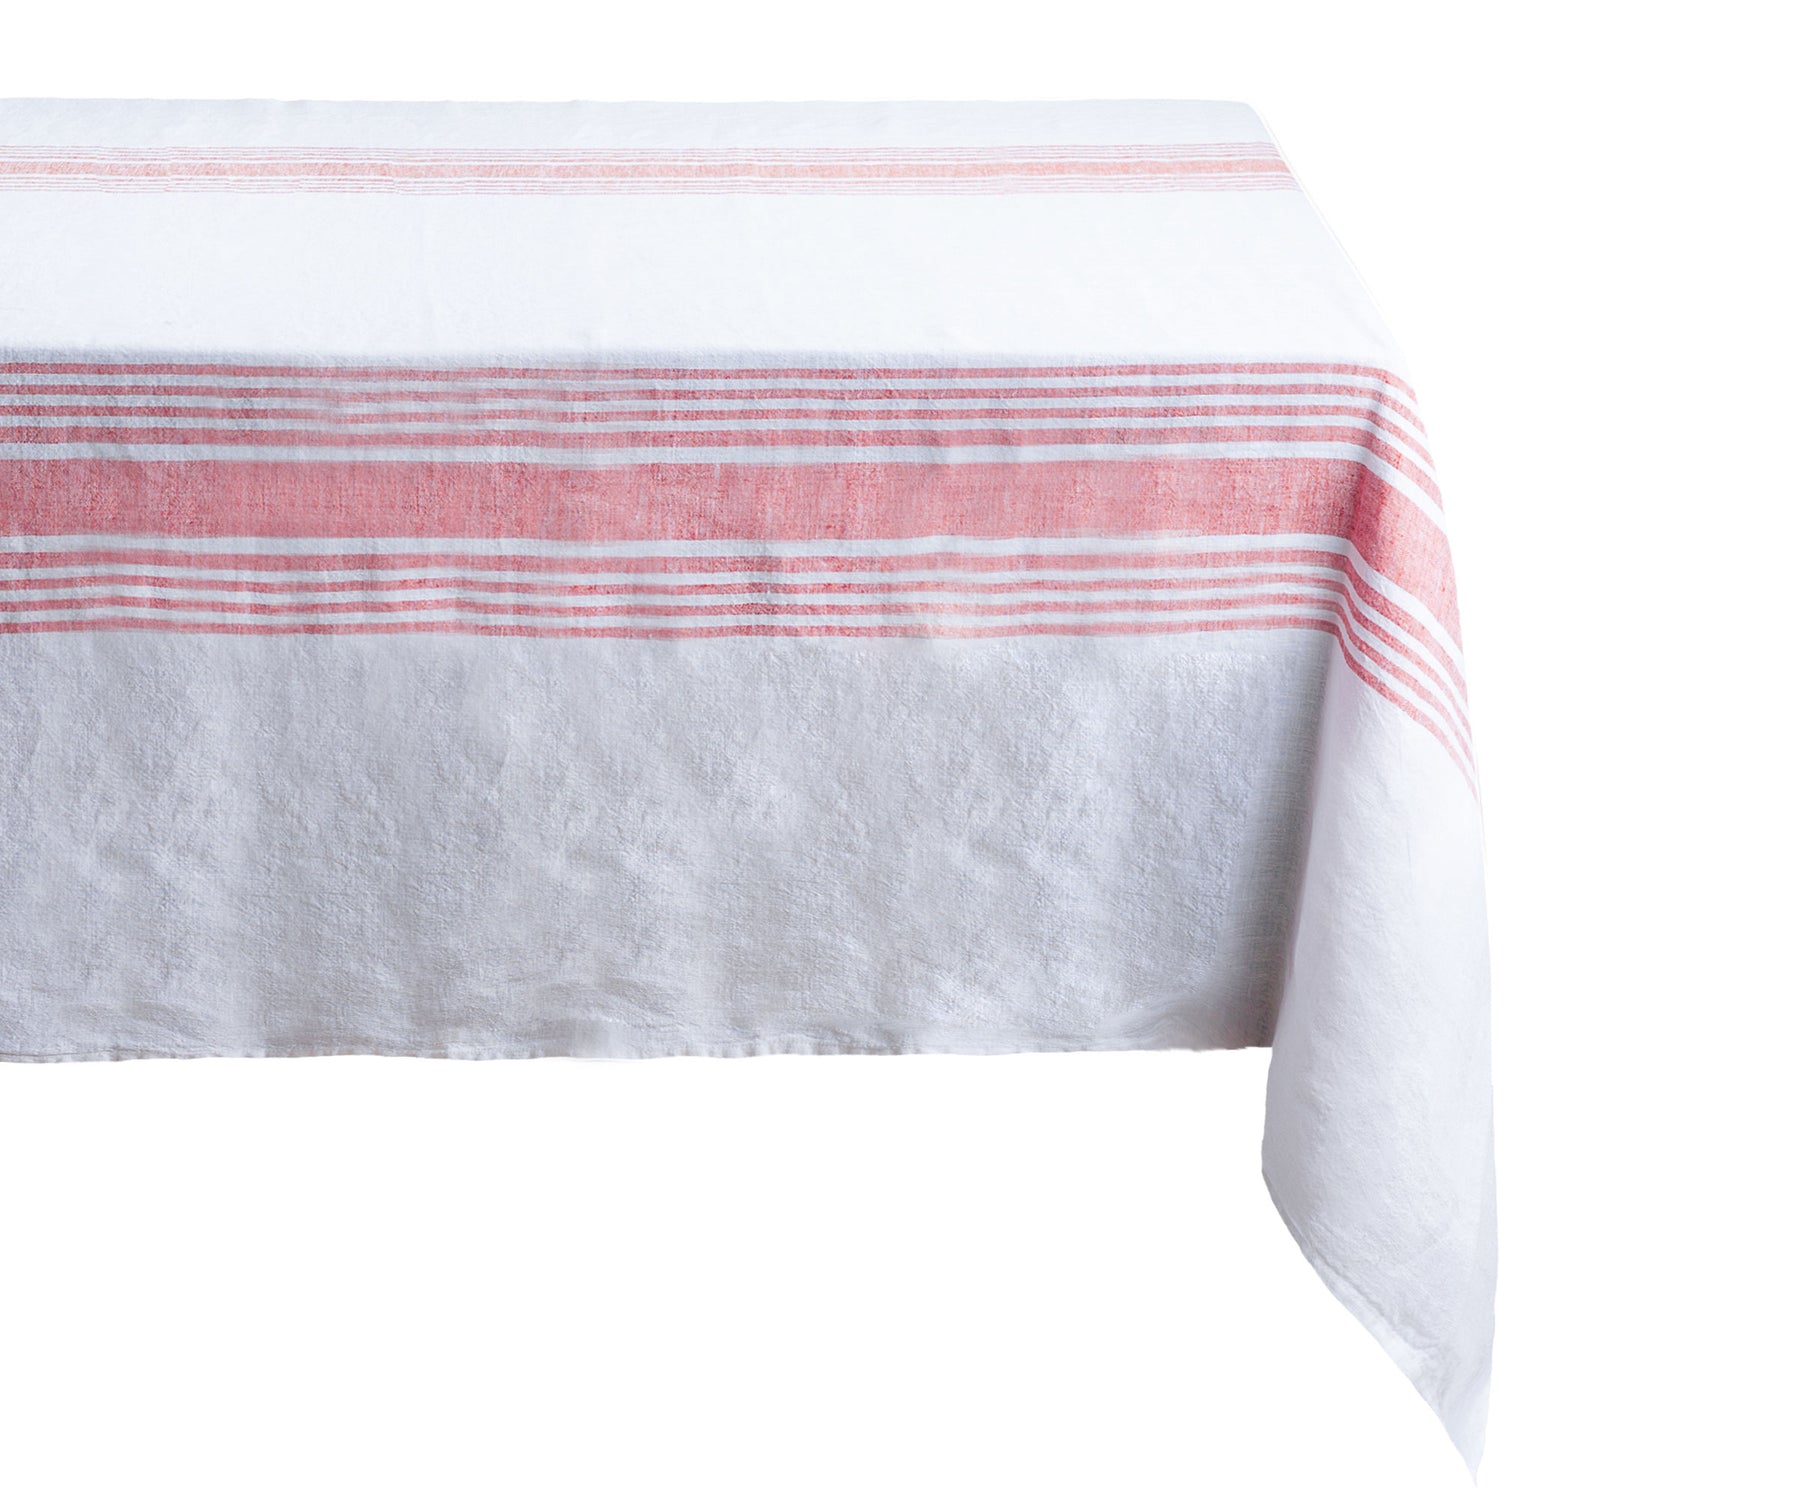 Classic red and white striped linen tablecloth for dining